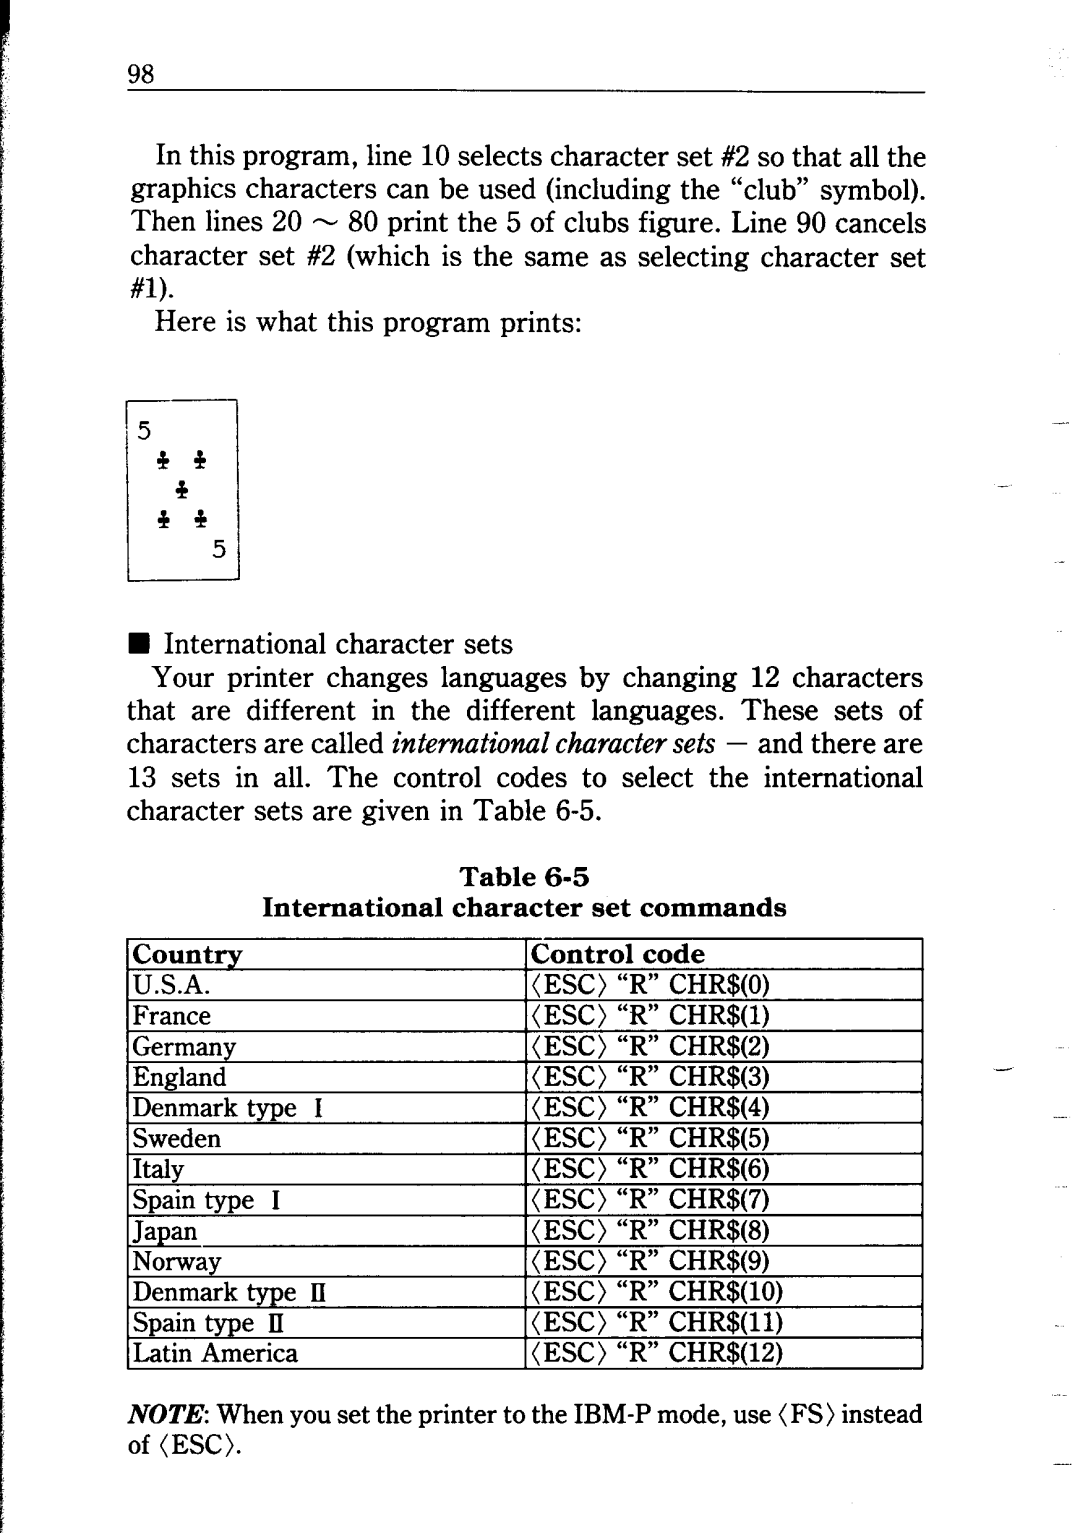 Star Micronics NB24-10/15 user manual Here is what this program prints n International character sets 